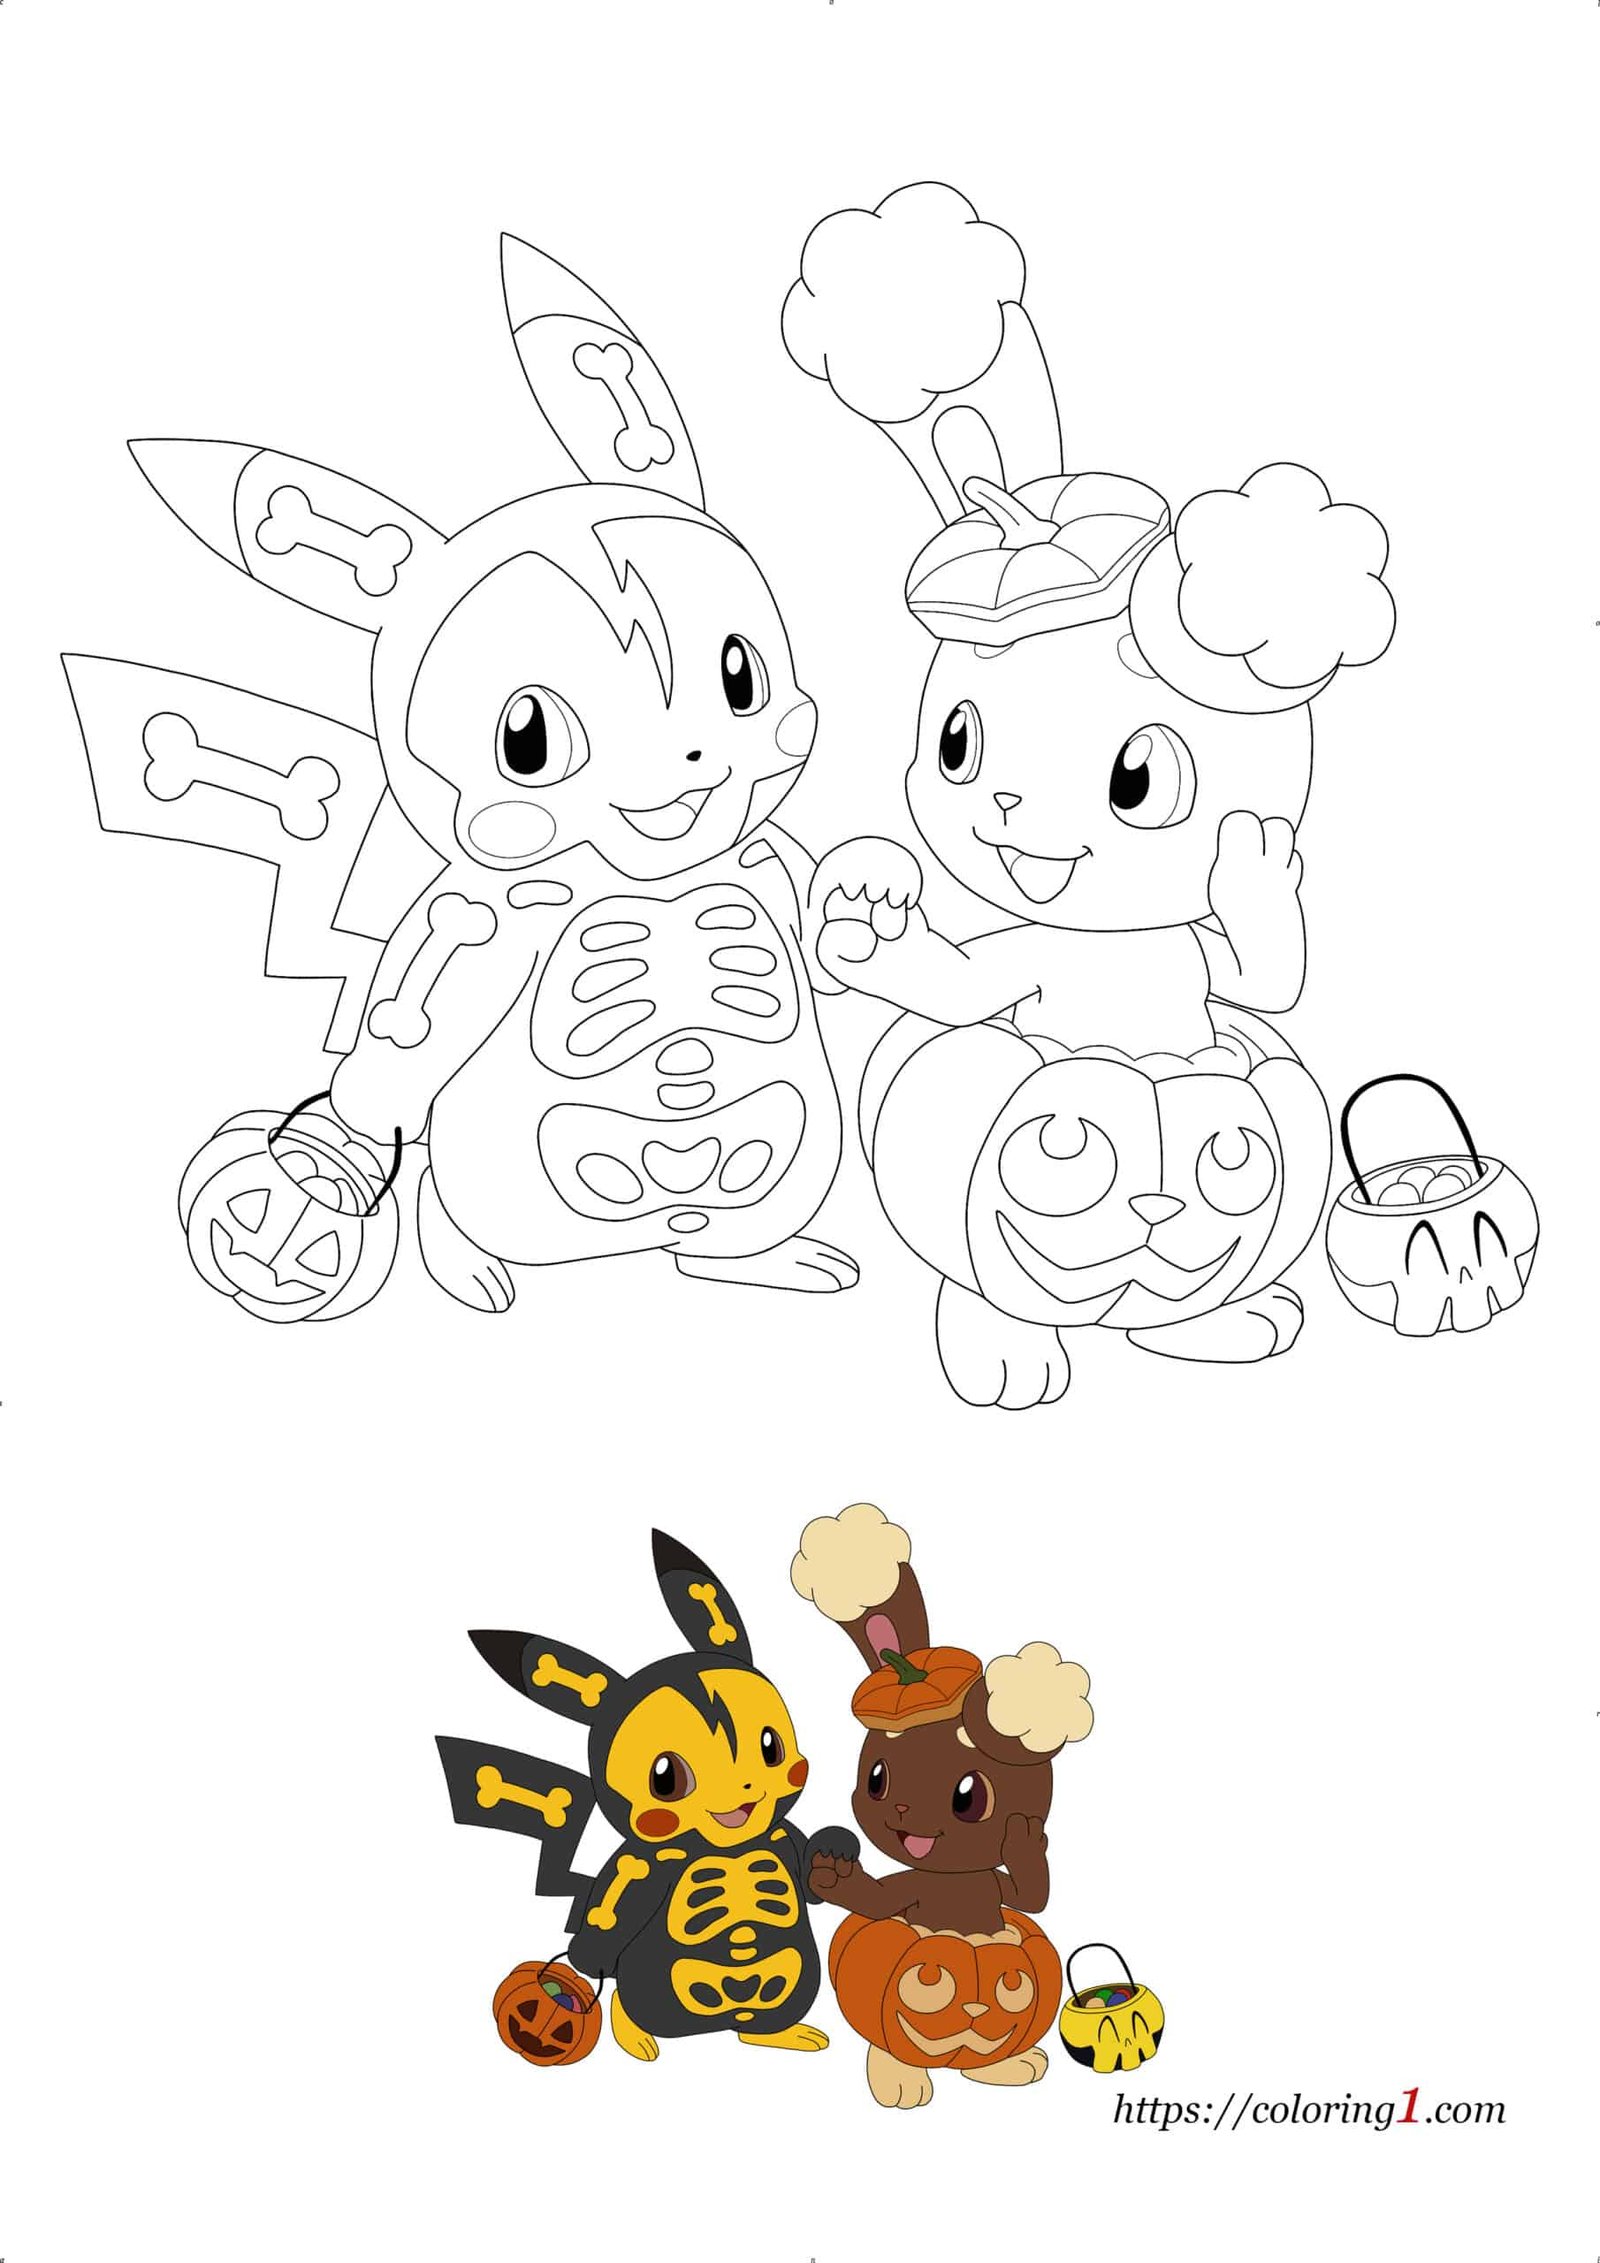 Pokemon Halloween free online coloring book page to print for kids and adults